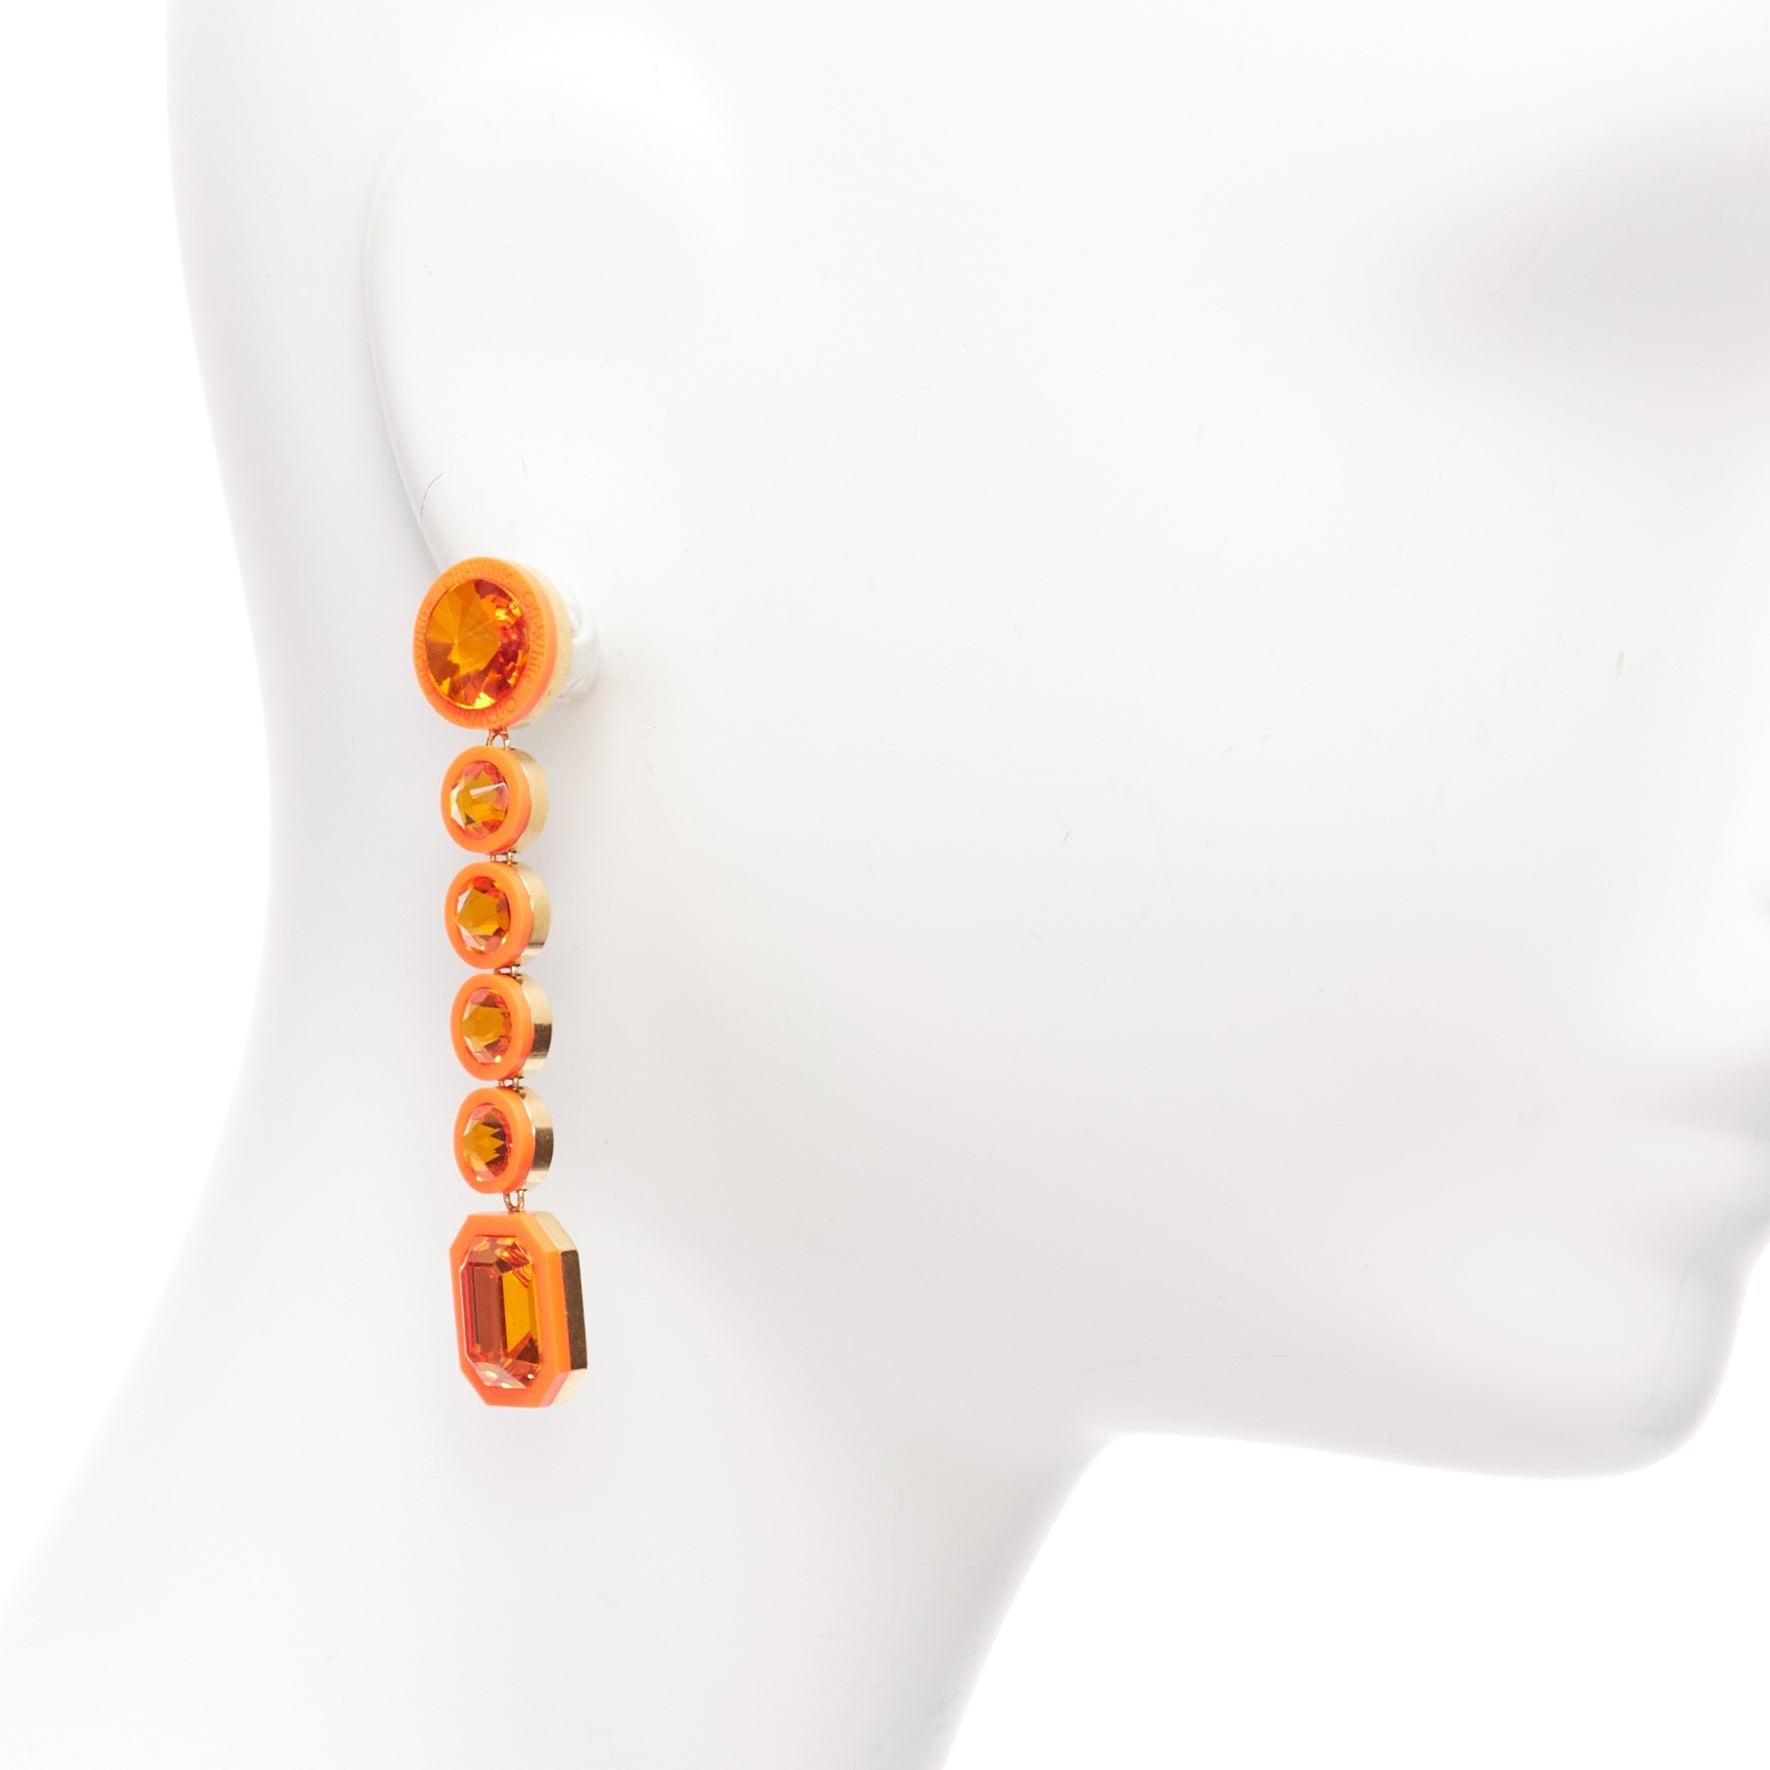 OFF WHITE neon orange gold logo jewel rhinestone drop pin earrings pair
Reference: AAWC/A00897
Brand: Off White
Material: Metal, Acrylic
Color: Orange, Gold
Pattern: Crystals
Closure: Pin
Lining: Gold Metal
Made in: Italy

CONDITION:
Condition: Very